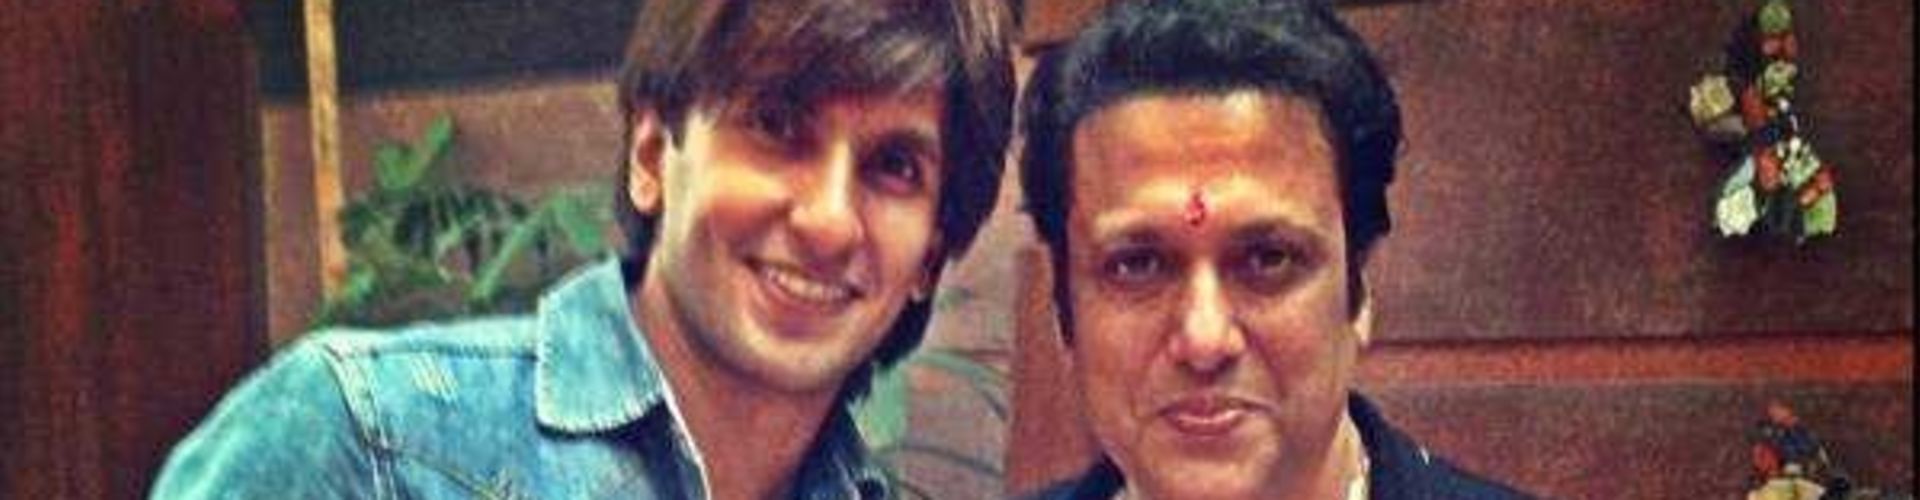 Govinda wishes the best for his biggest fan Ranveer Singh for his new life